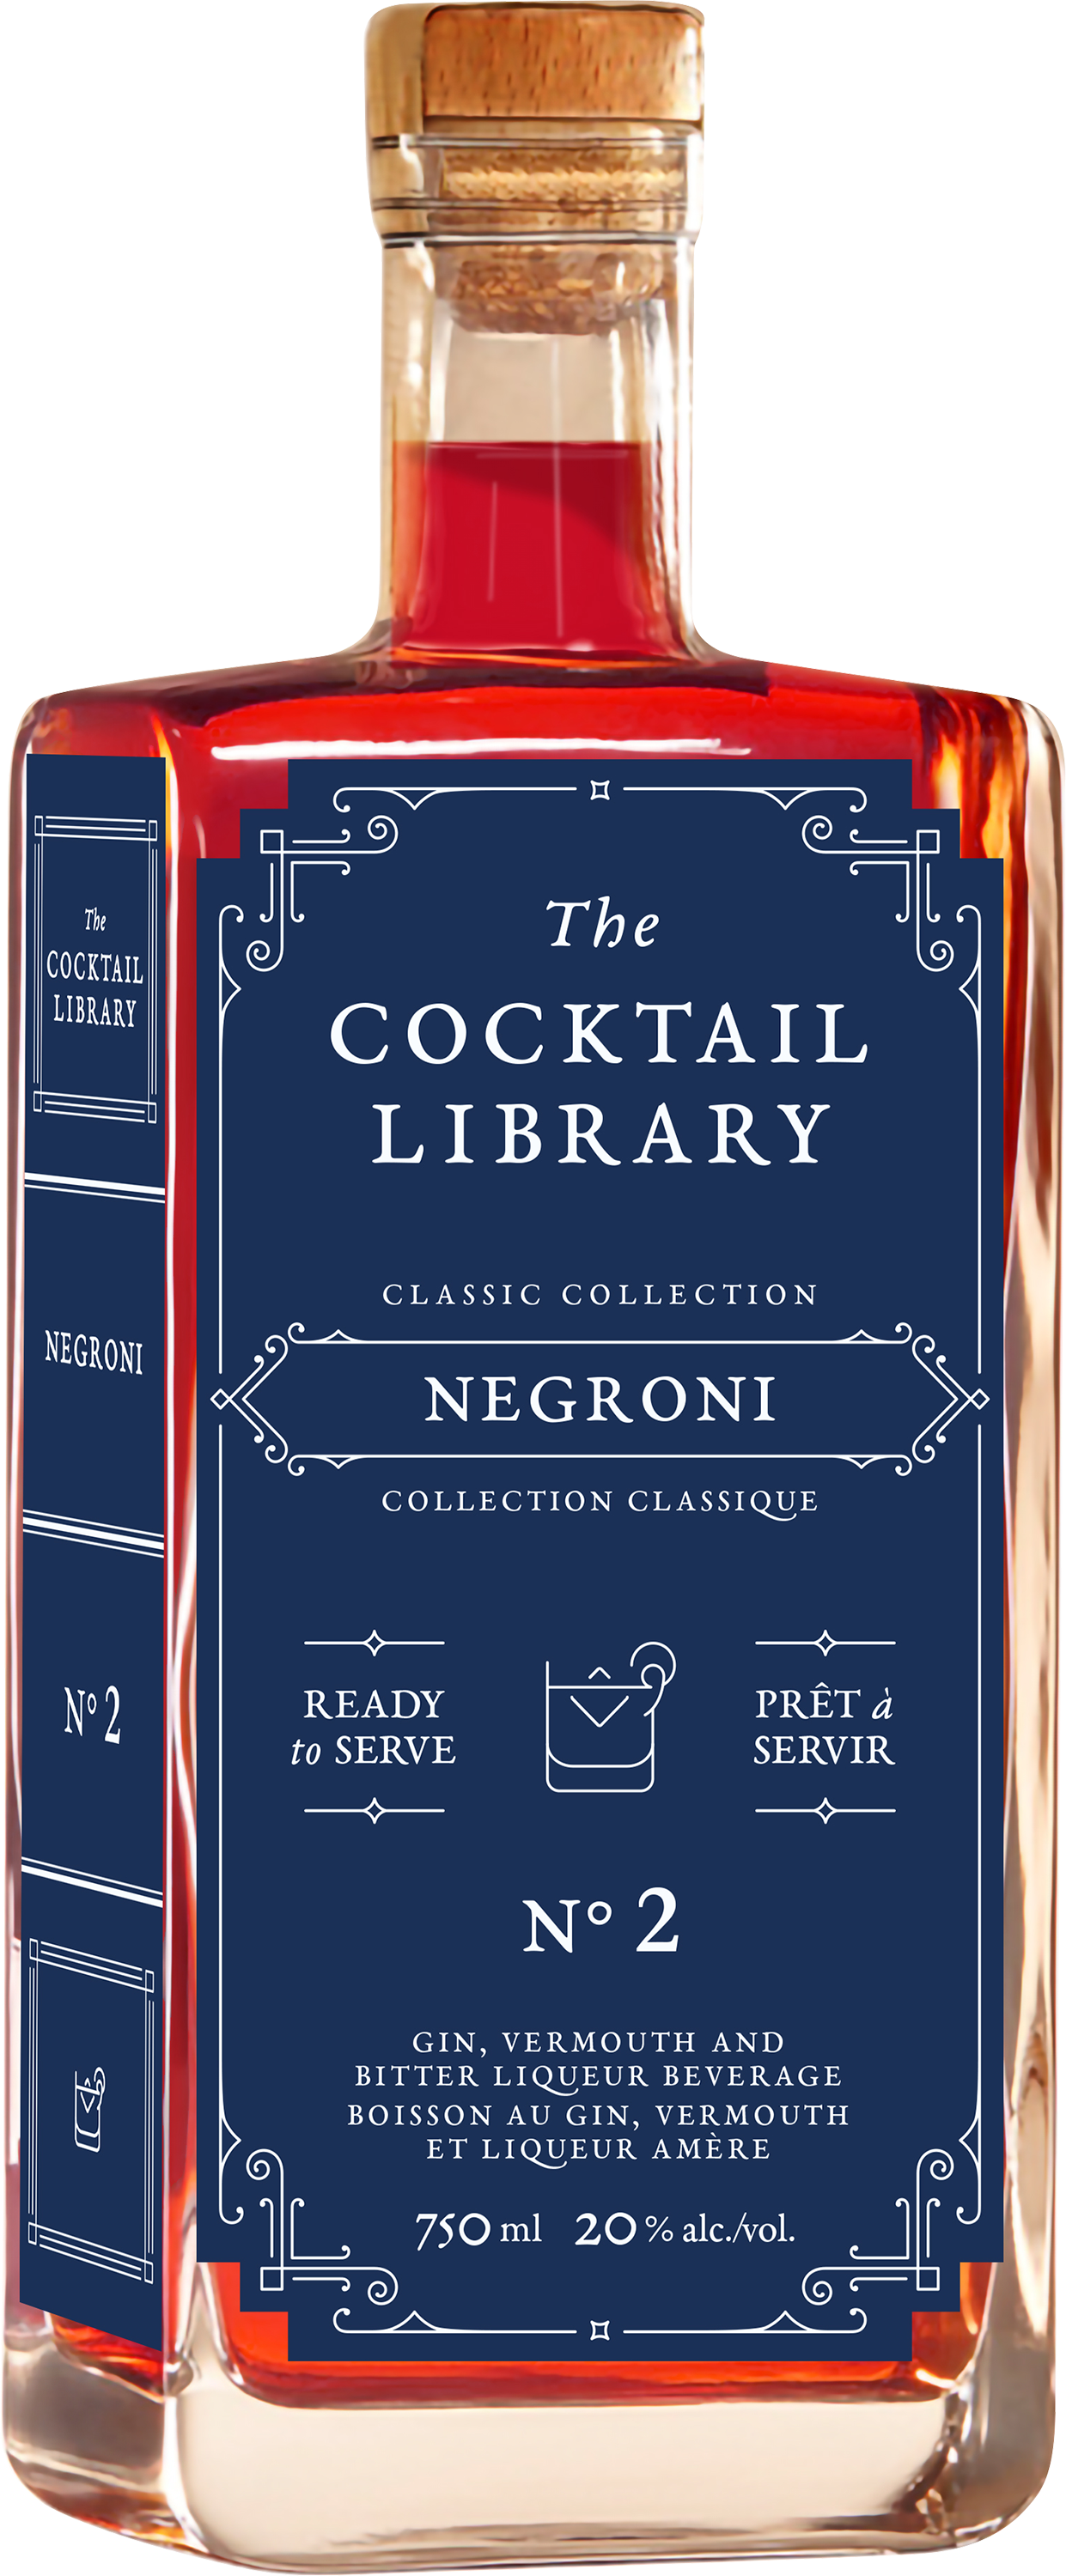 The Cocktail Library Negroni